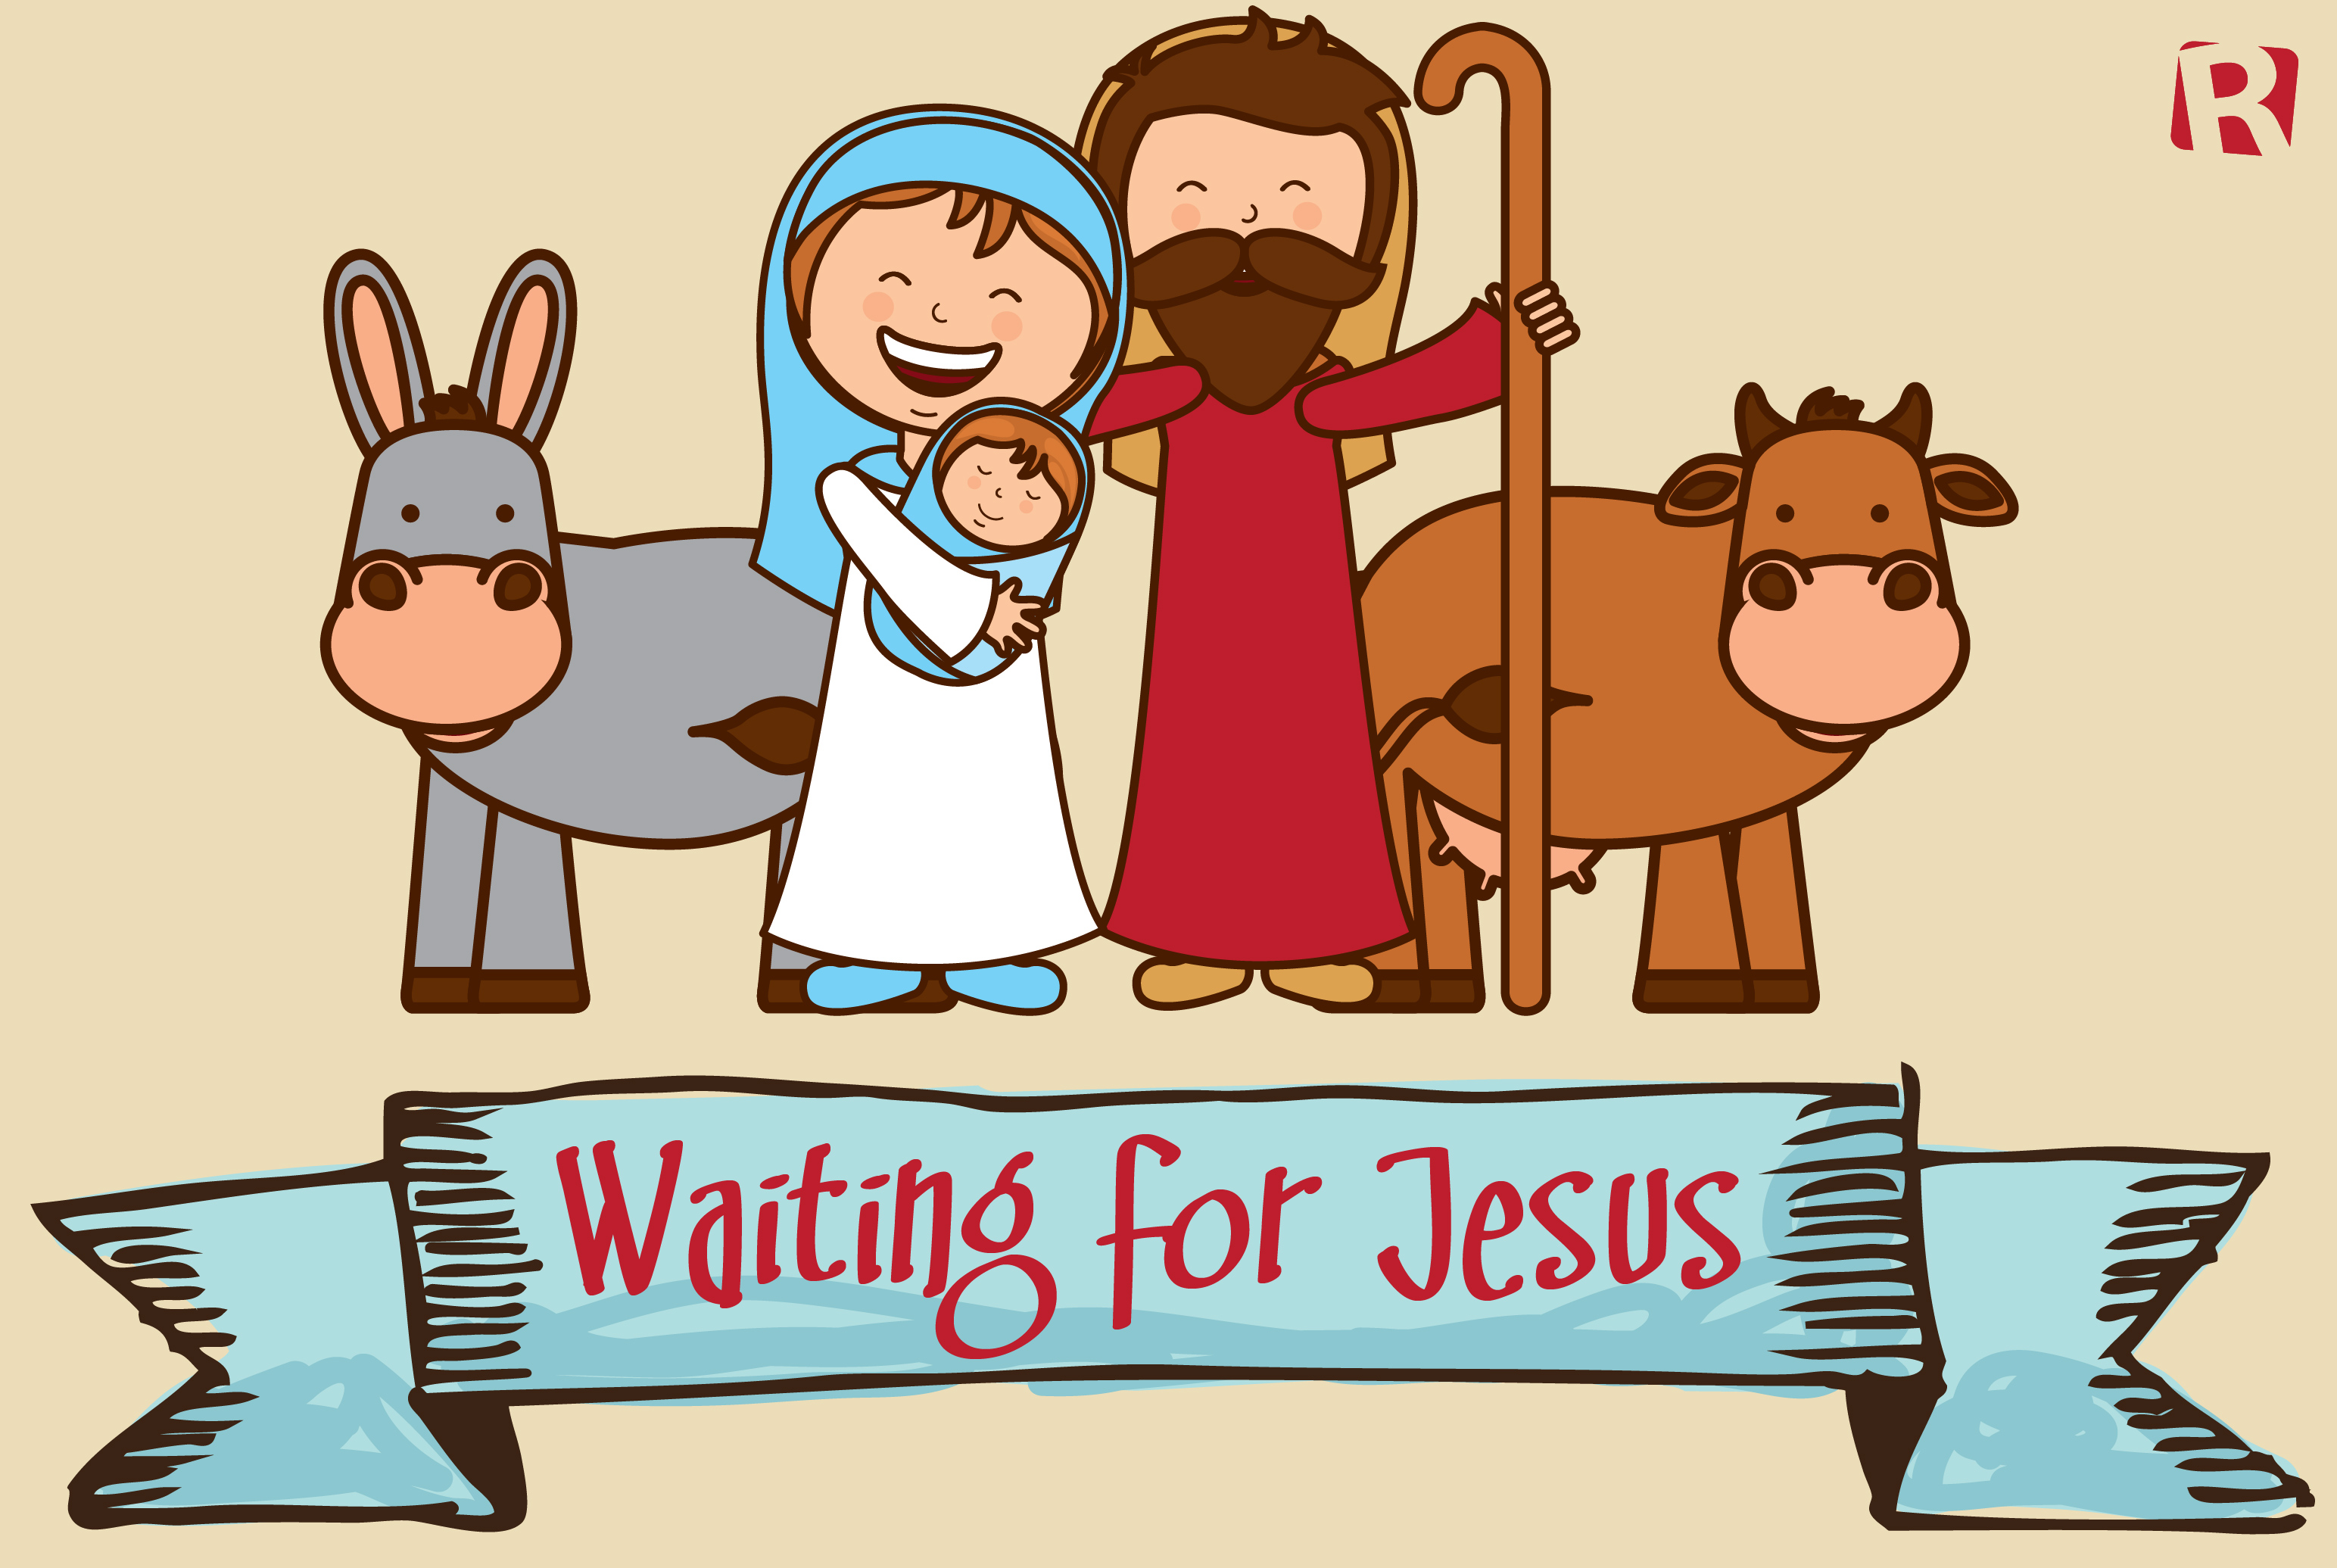 Waiting for Jesus.